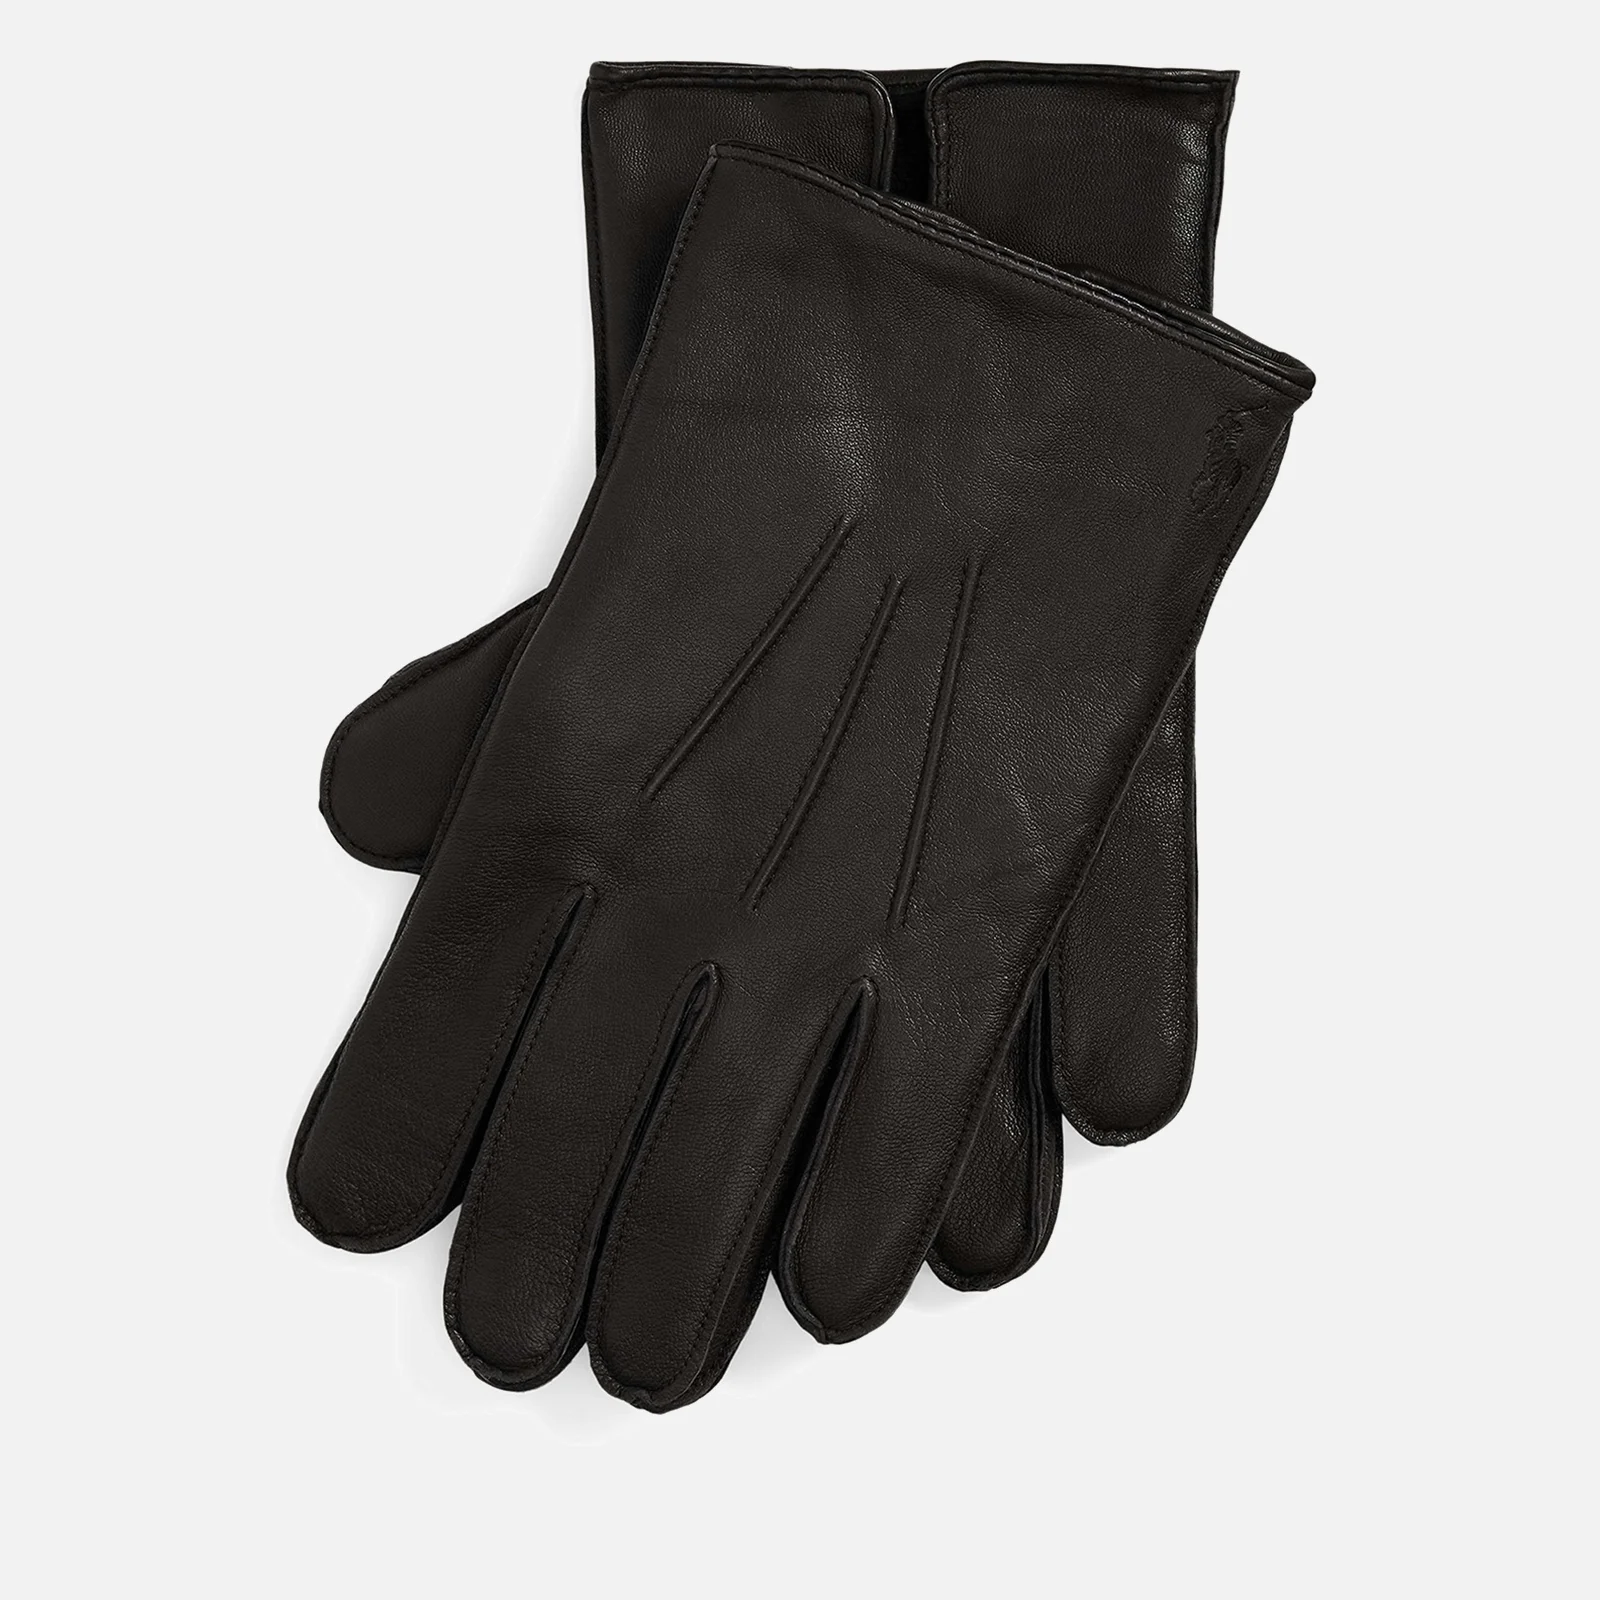 Polo Ralph Lauren Nappa Leather Gloves Image 1